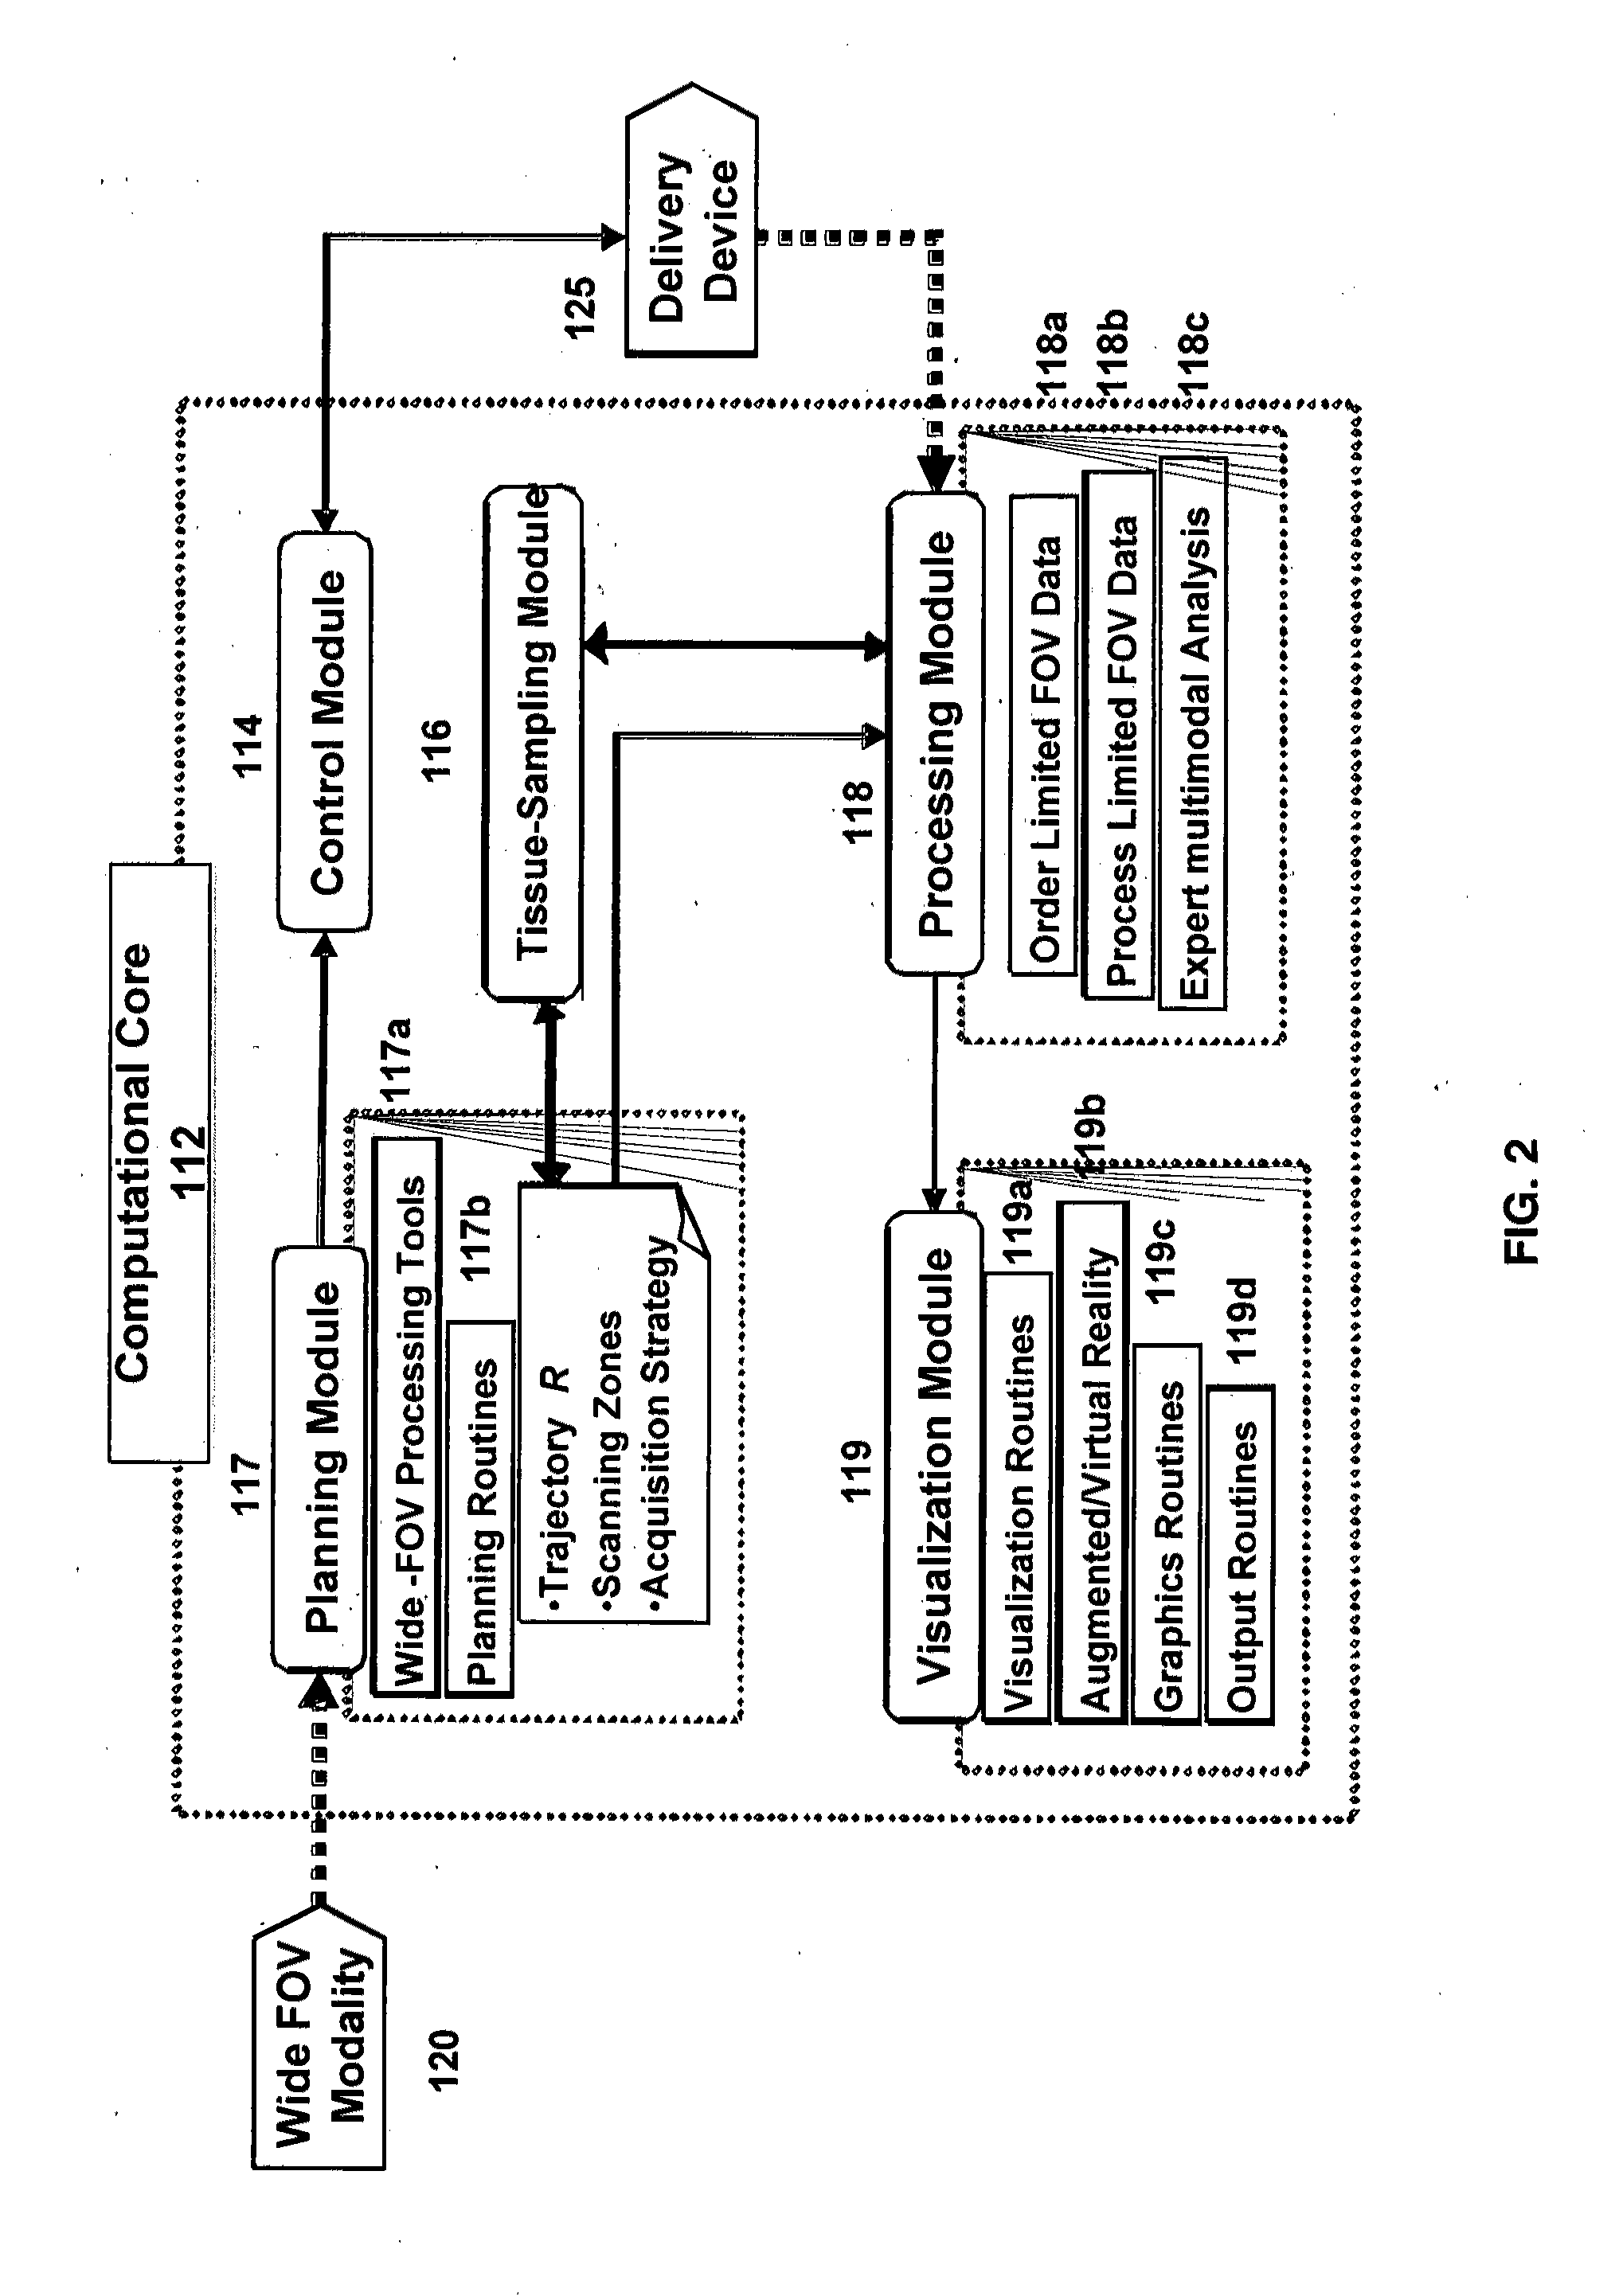 Devices, systems and methods for multimodal biosensing and imaging